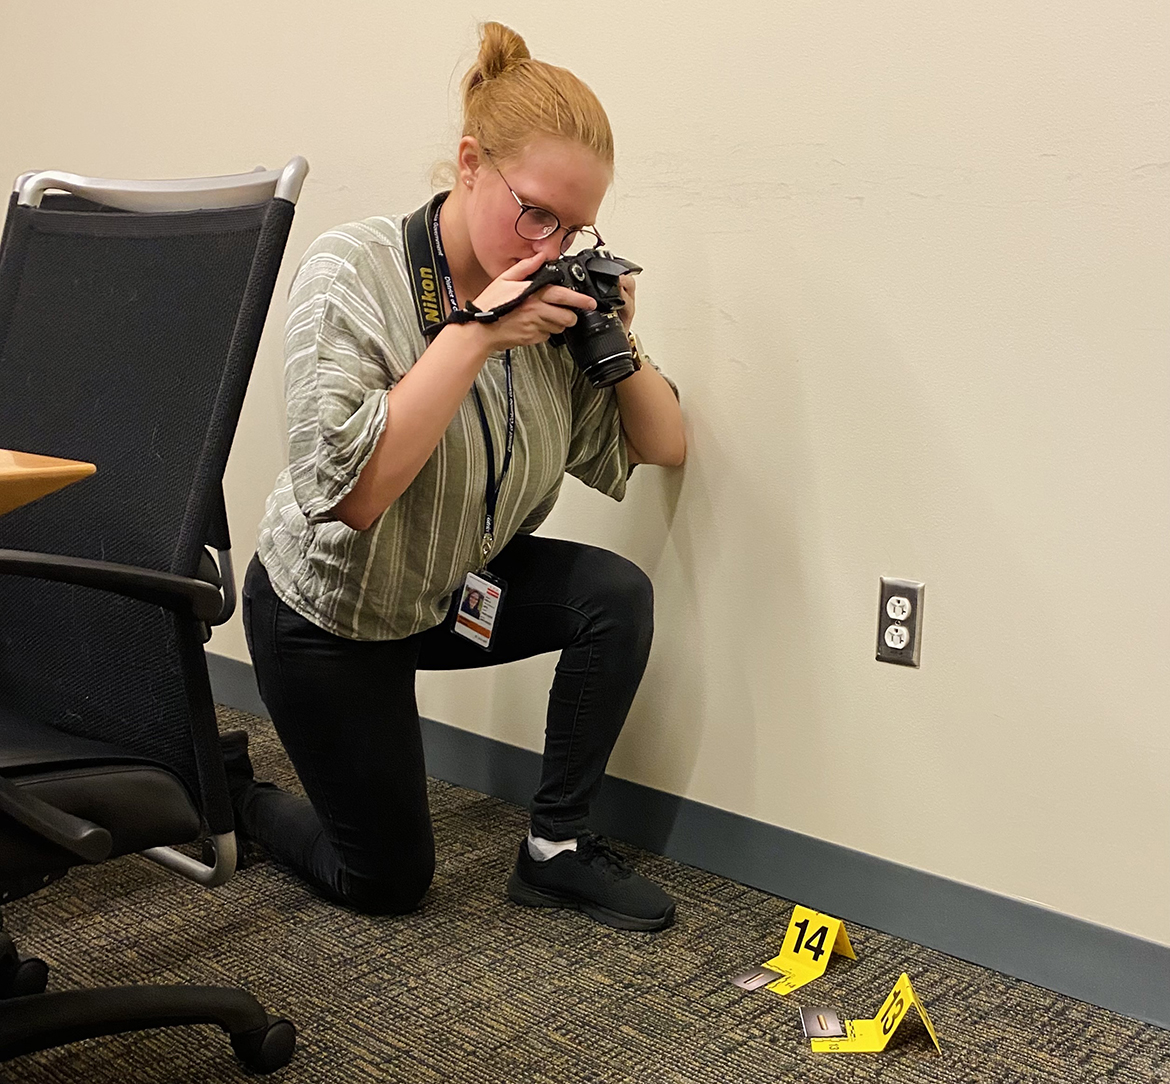 As part of U.S. Department of Forensic Science internship in the summer of 2022, Middle Tennessee State University senior Elizabeth Kowalczyk of Huntsville, Ala., takes photos at a mock crime scene, with bullet recovery depicted in the image. Kowalczyk was recently named a 2023 Goldwater Scholar by the Barry Goldwater Scholarship and Excellence in Education Foundation. The award encourages outstanding undergraduate students to pursue careers in science, technology, engineering and mathematics research. (Submitted photo)